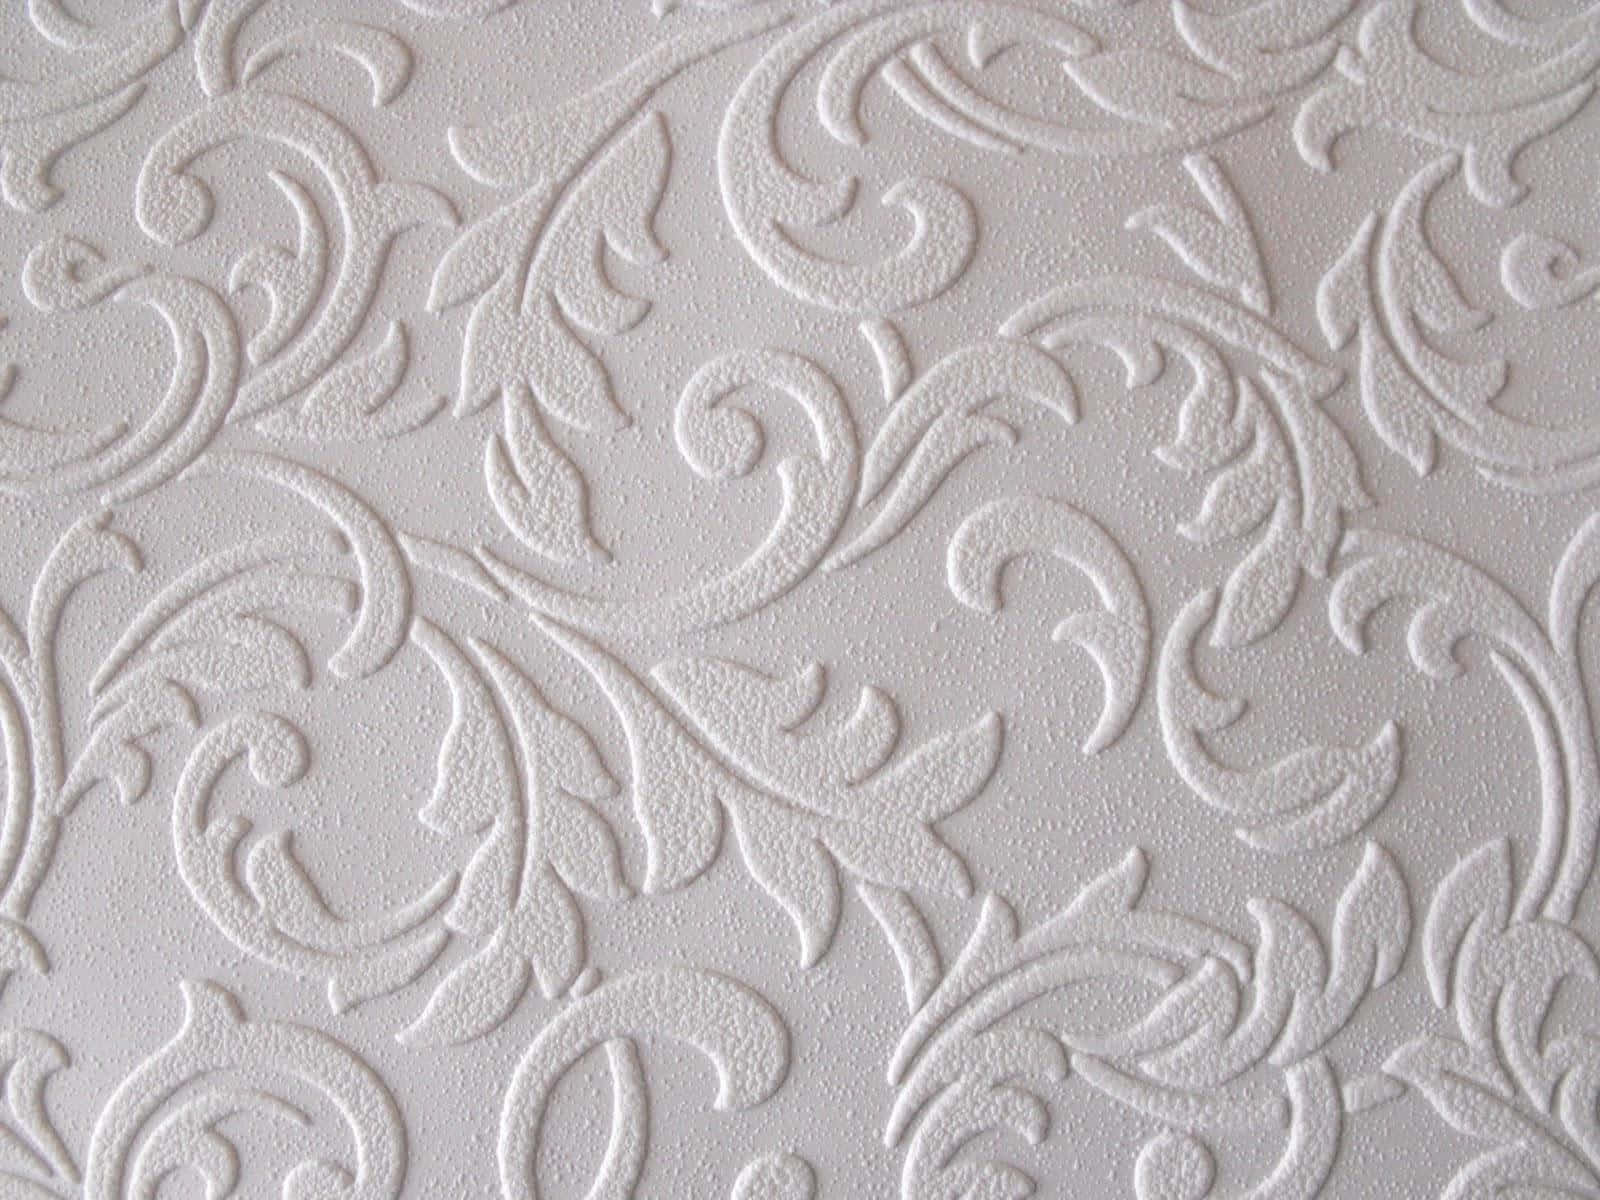 Rich and intricate, this lace pattern adds a delightful look to many fabrics!